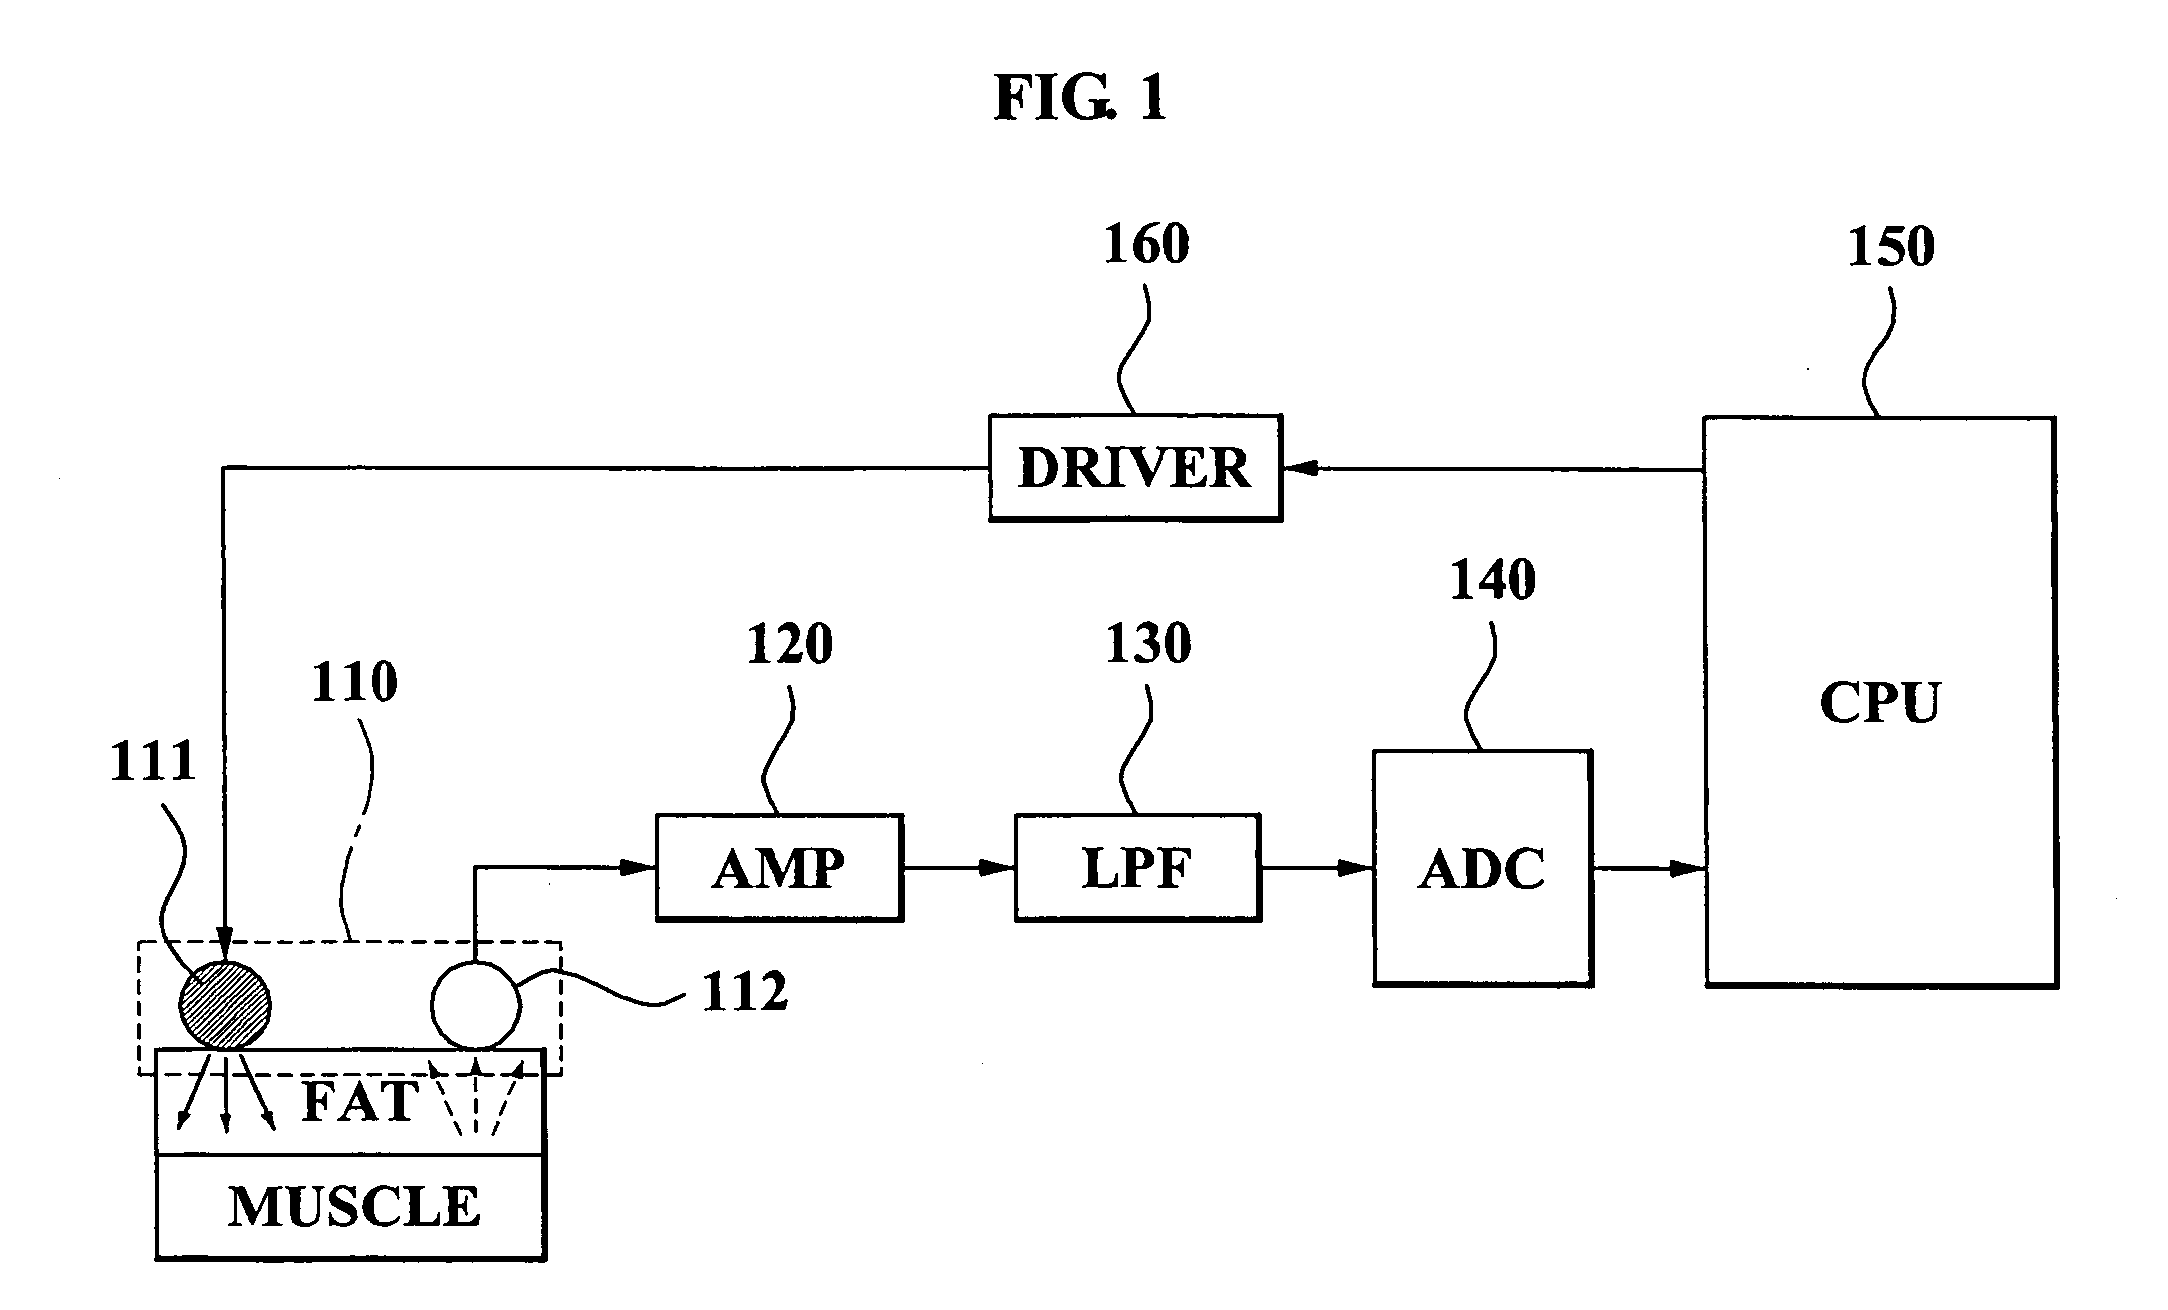 Local body fat measurement device and method of operating the same